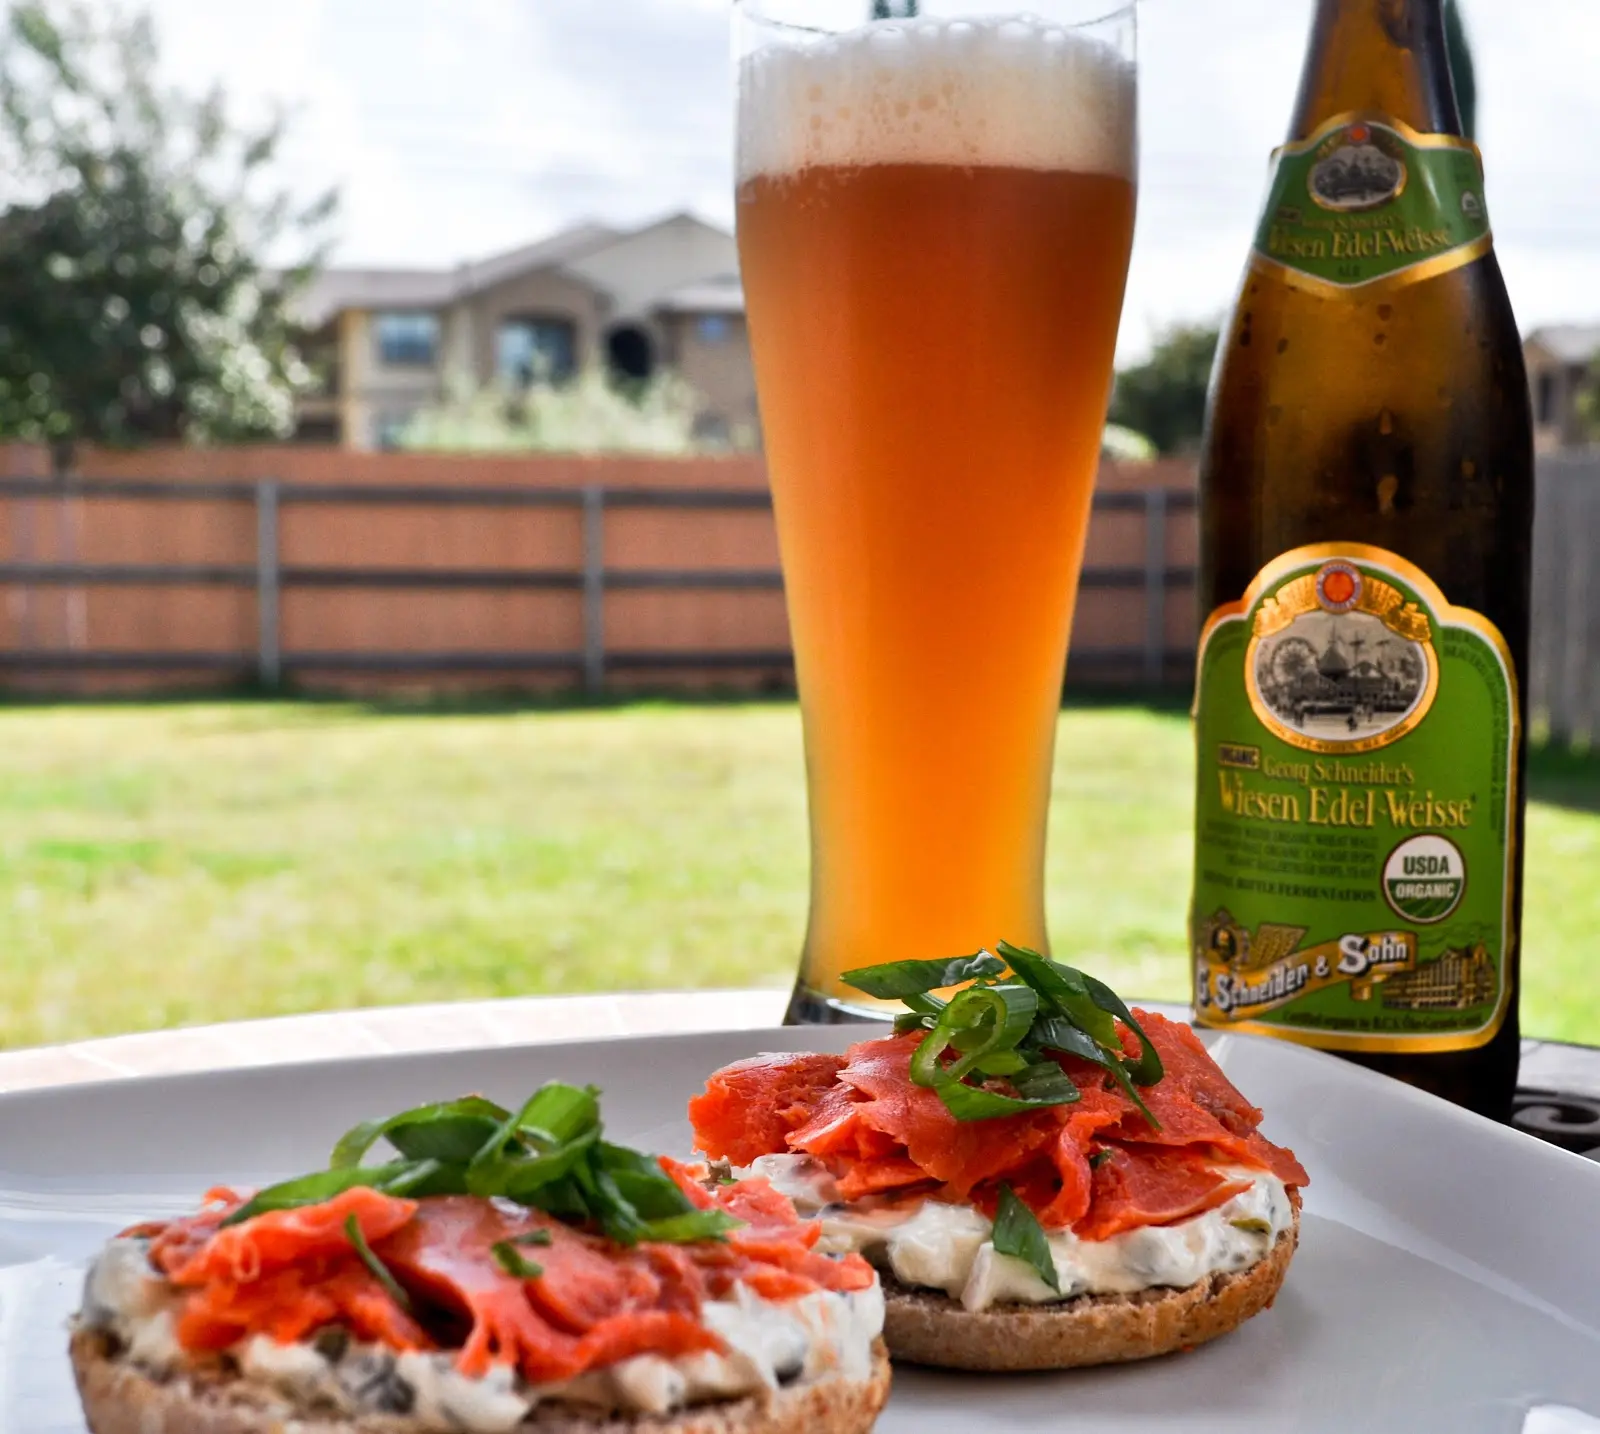 smoked salmon beer pairing - What beer is good with salmon